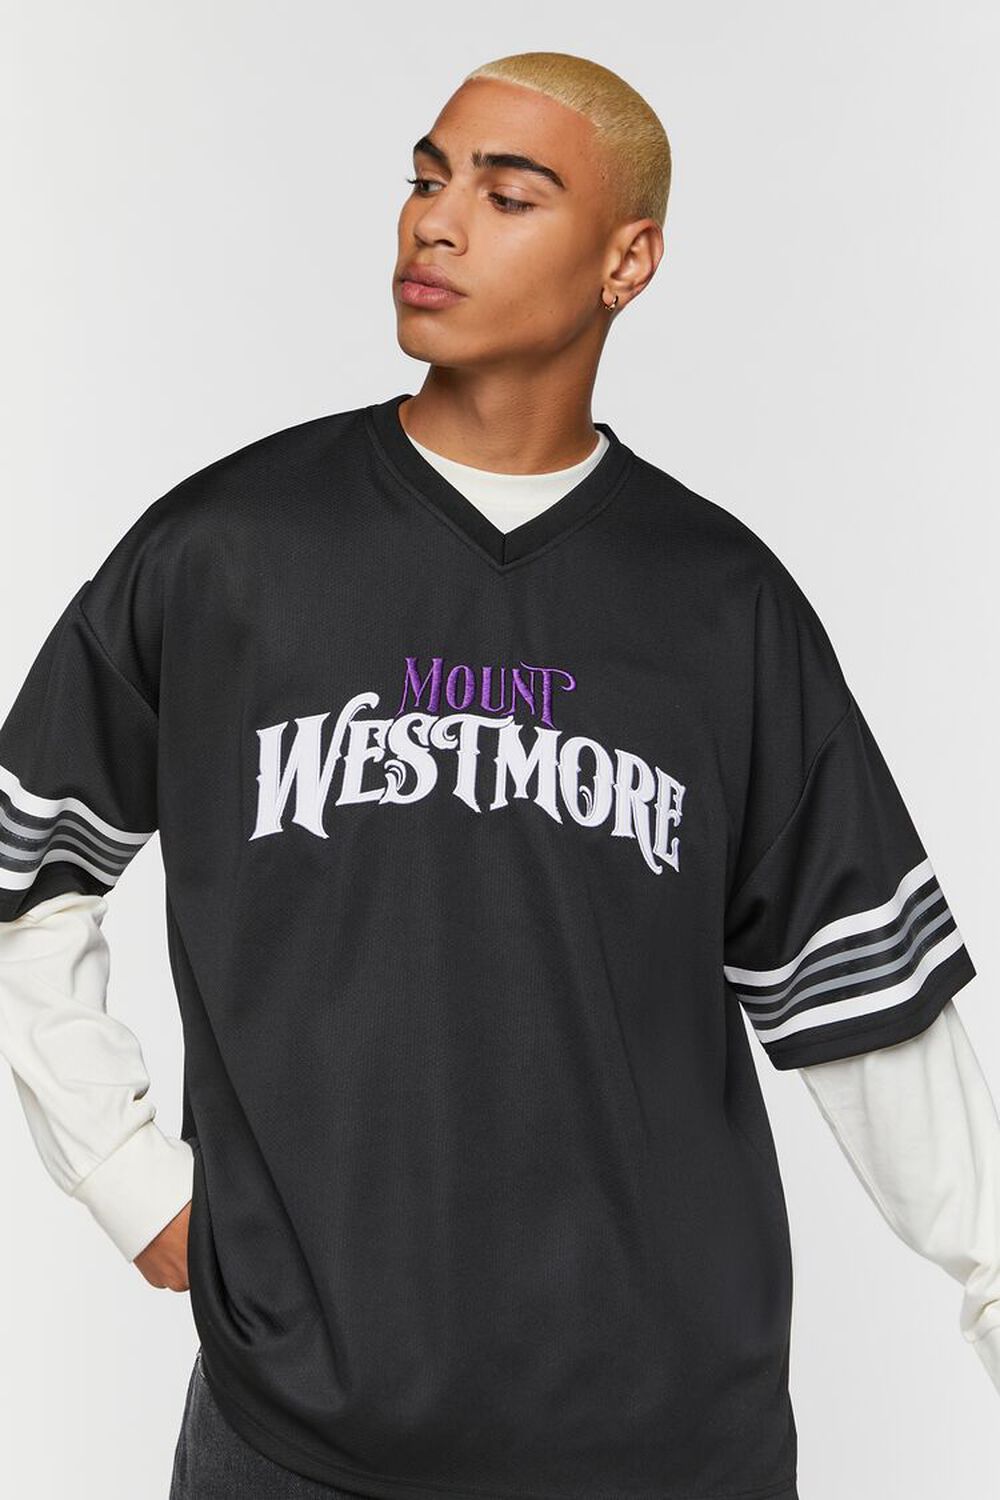 Mount Westmore Embroidered Varsity Tee, image 2